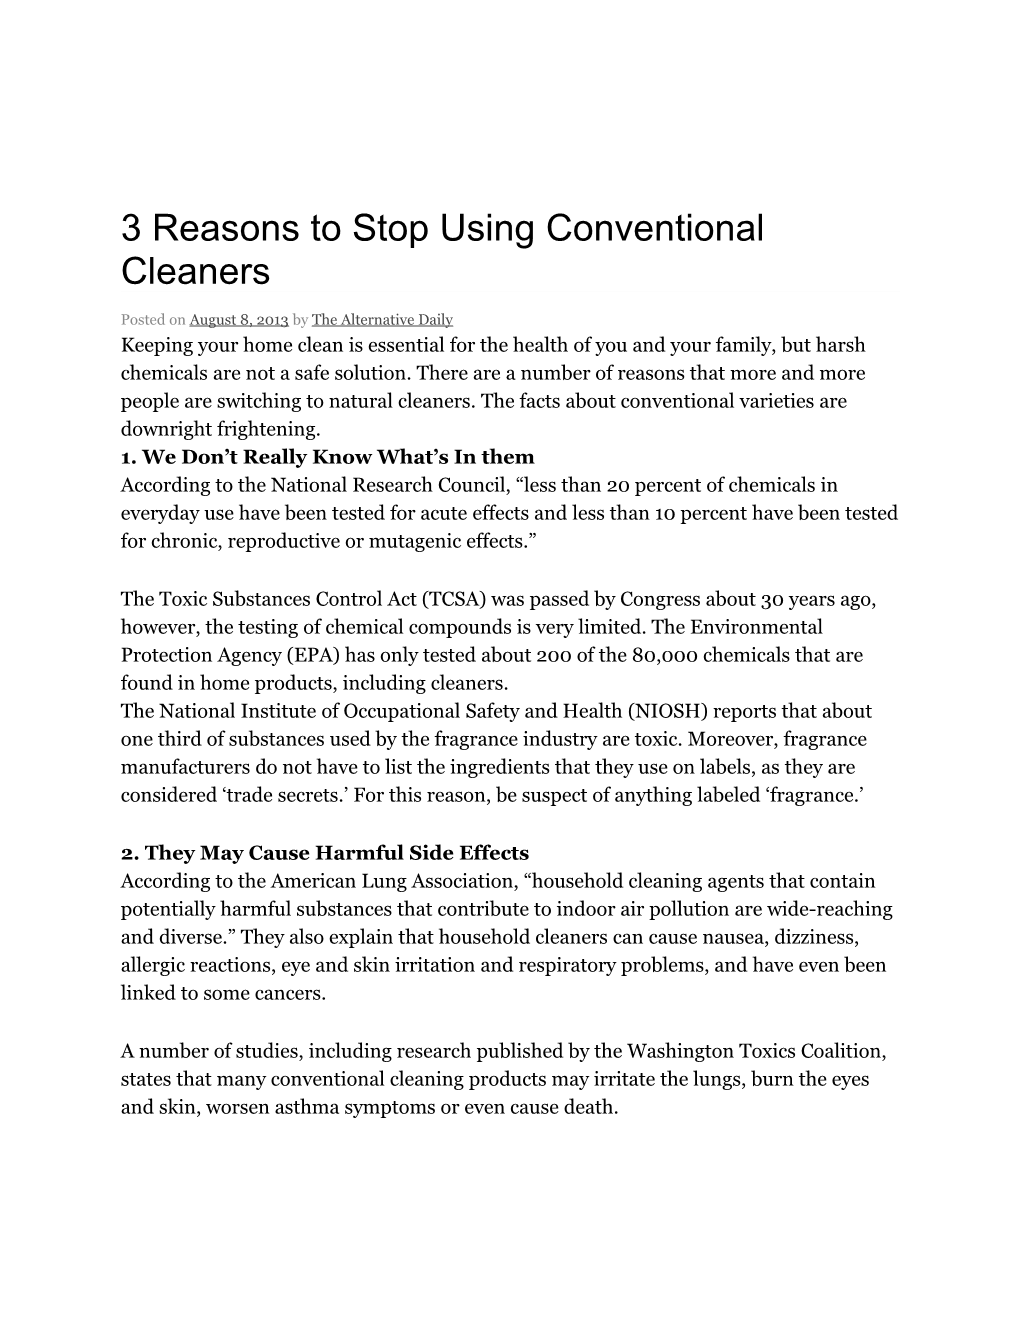 3 Reasons to Stop Using Conventional Cleaners